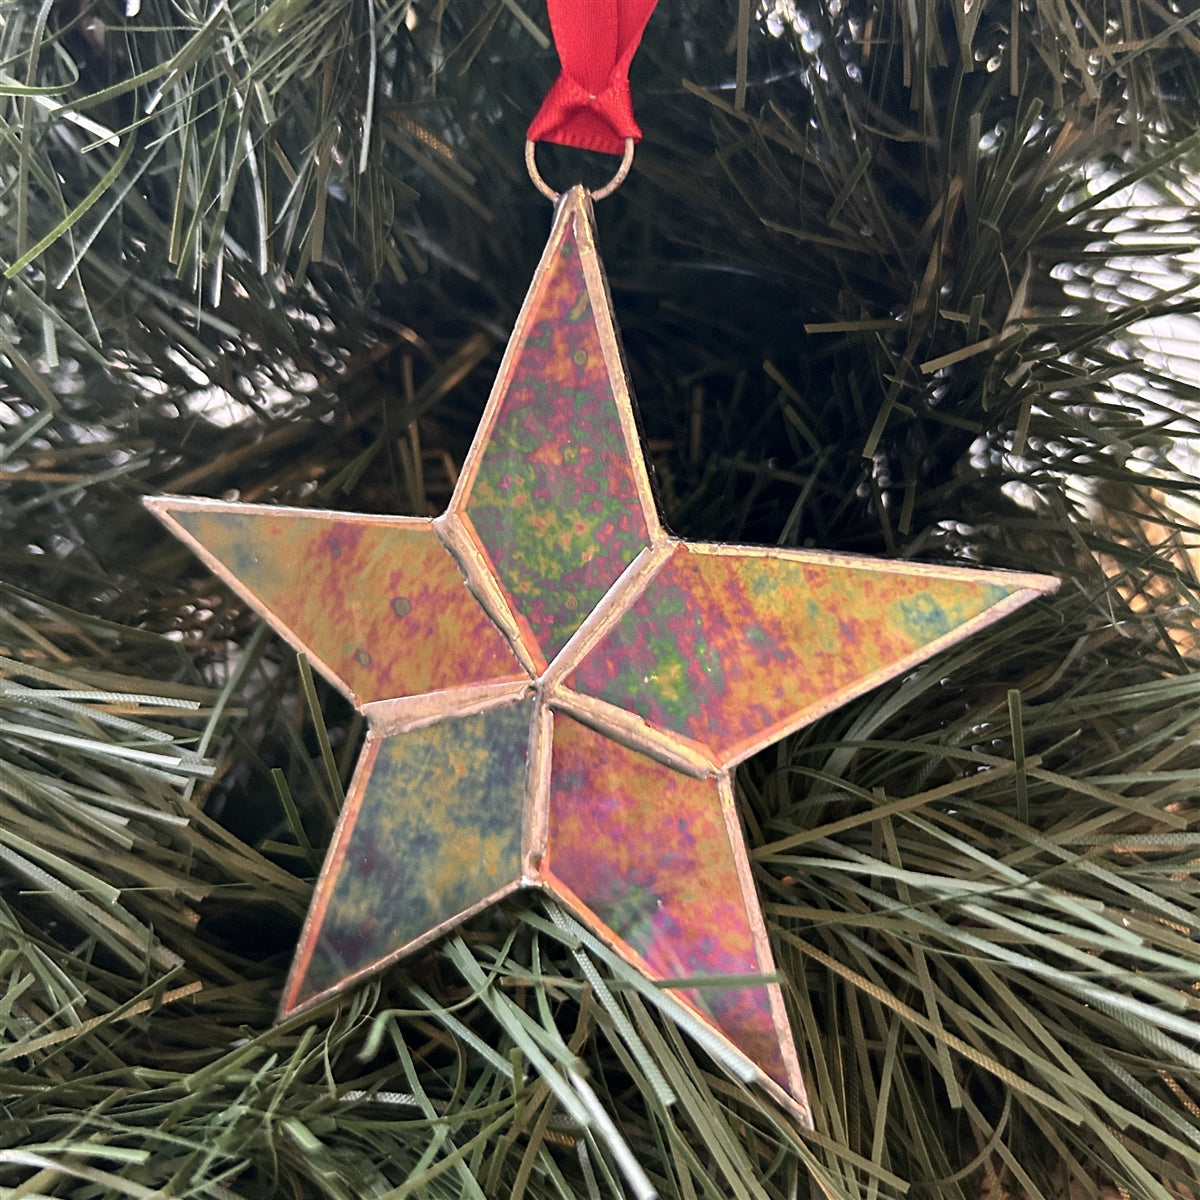 cCear iridescent stained glass star with silver edging hanging from red satin ribbon.